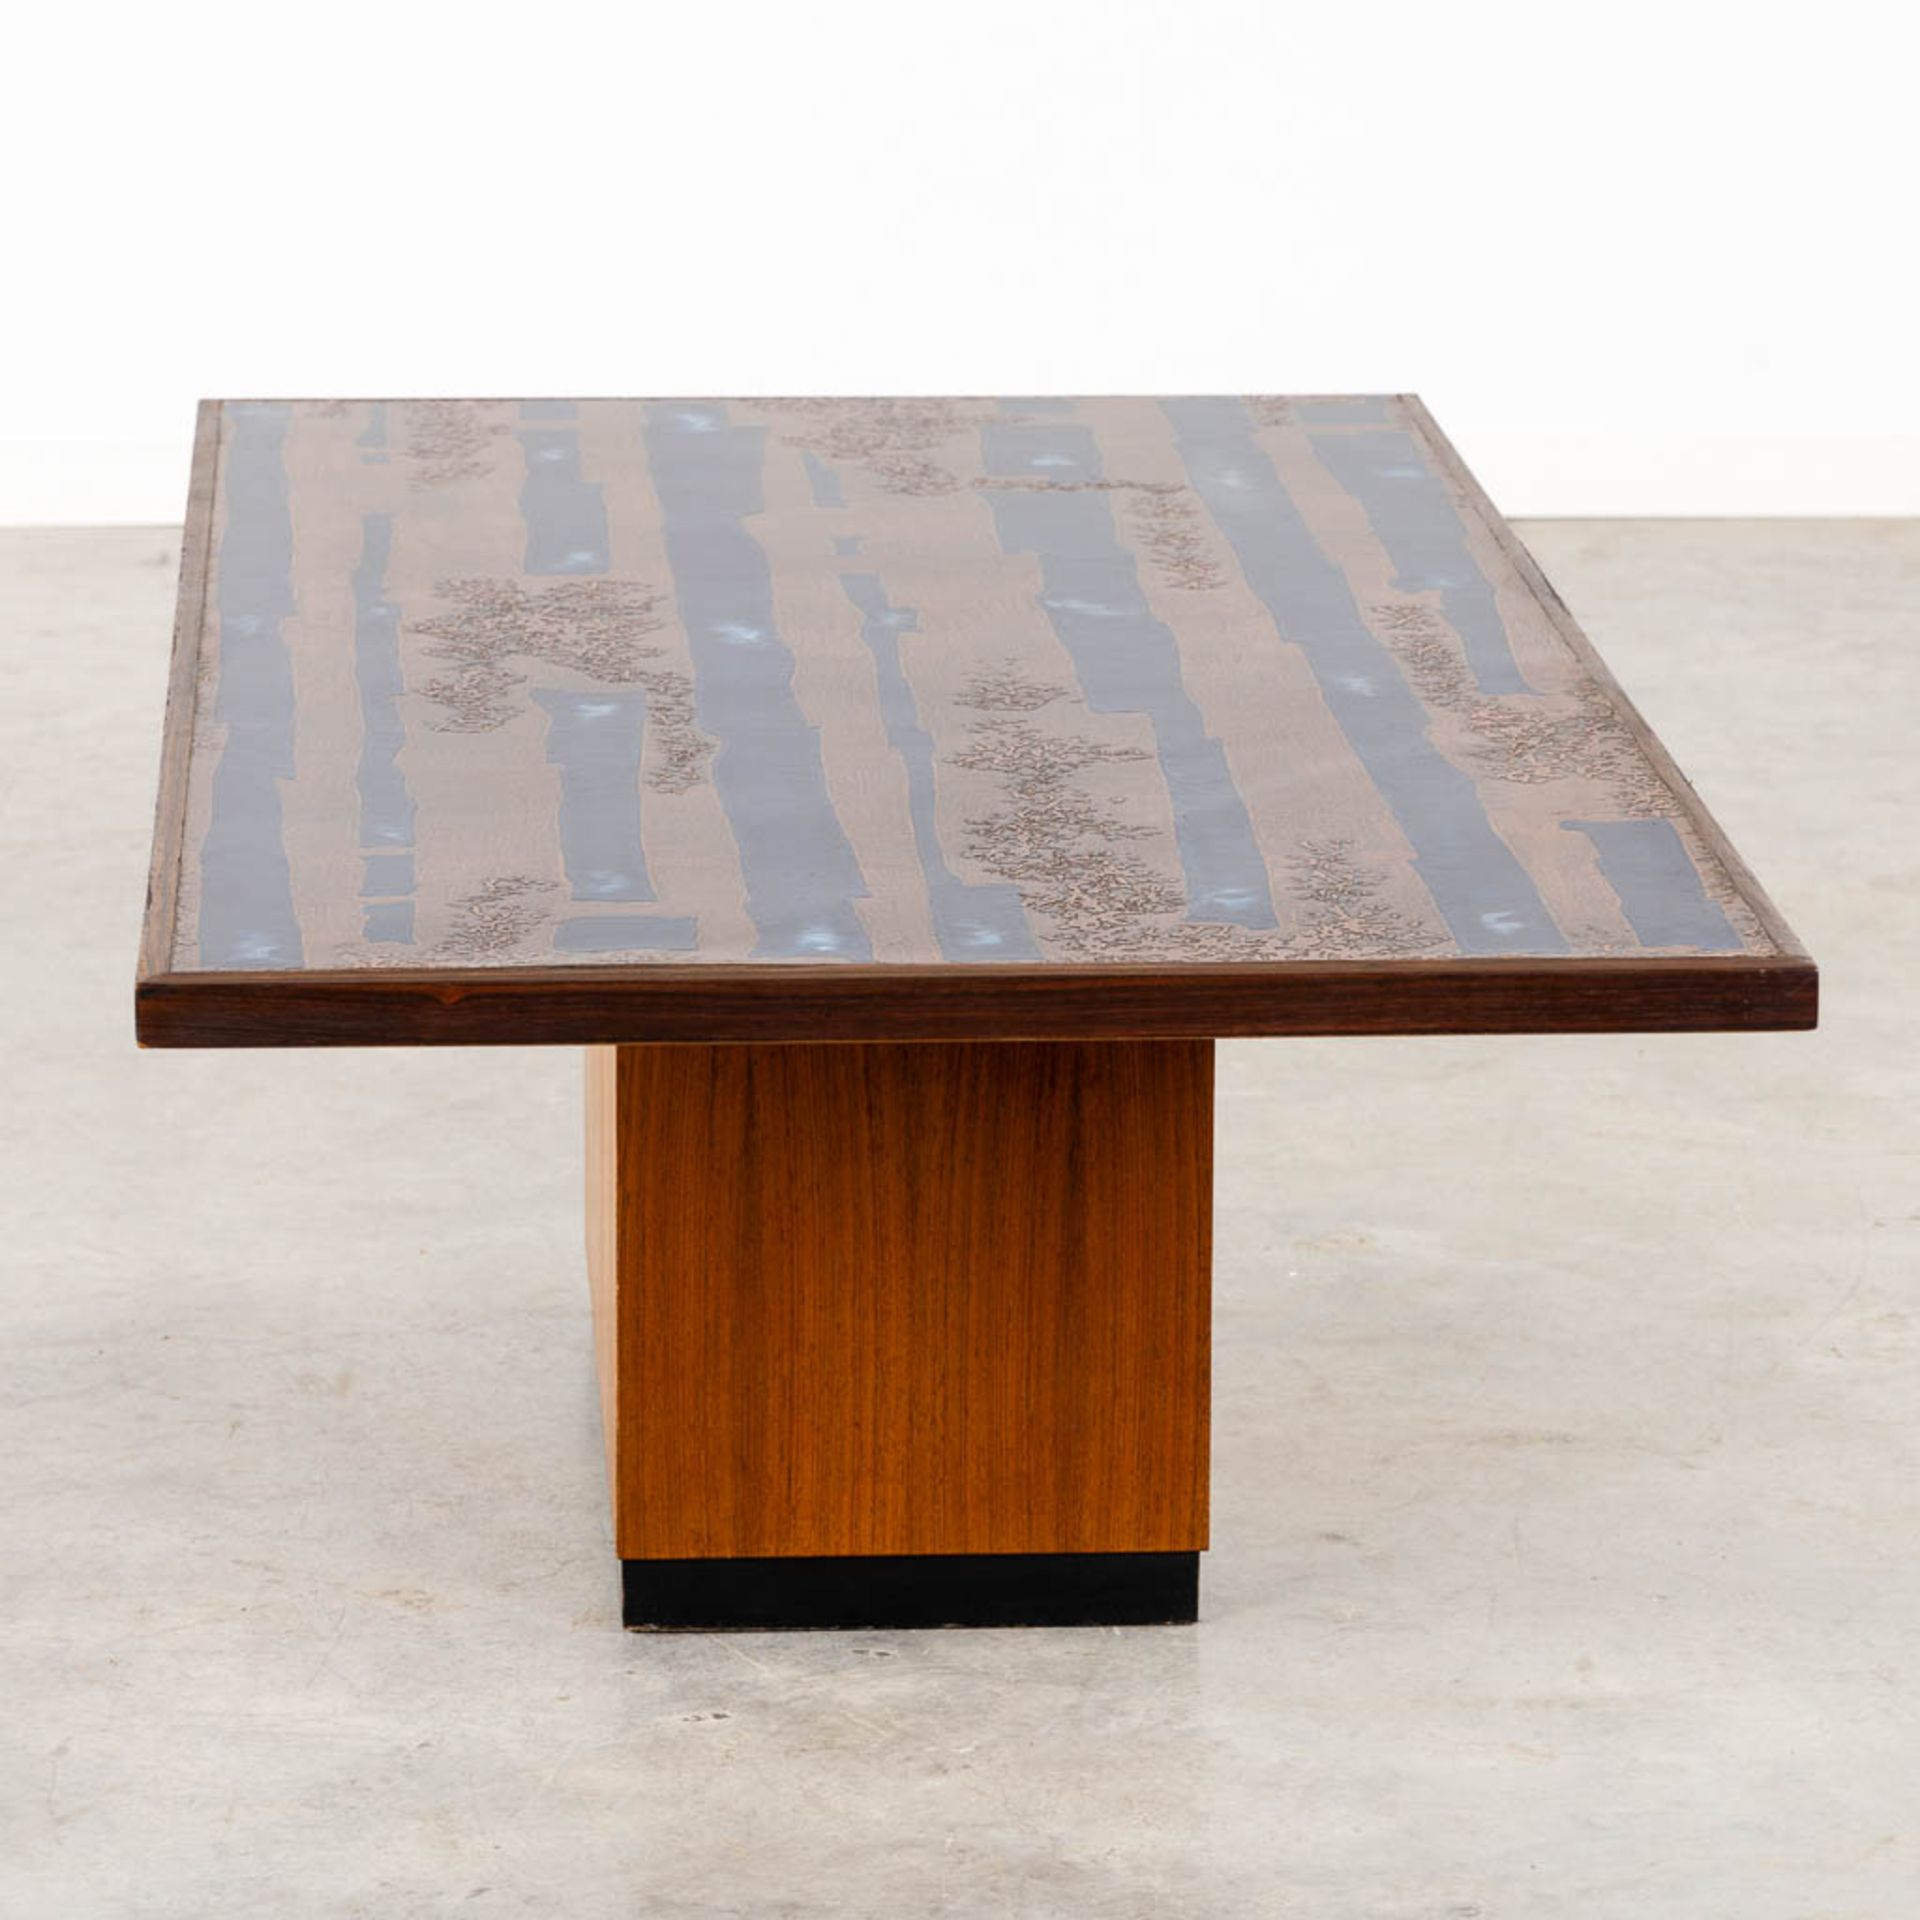 Heinz LILIENTHAL (1927-2006) 'Coffee Table' . (L:75 x W:150 x H:45 cm) - Image 4 of 10